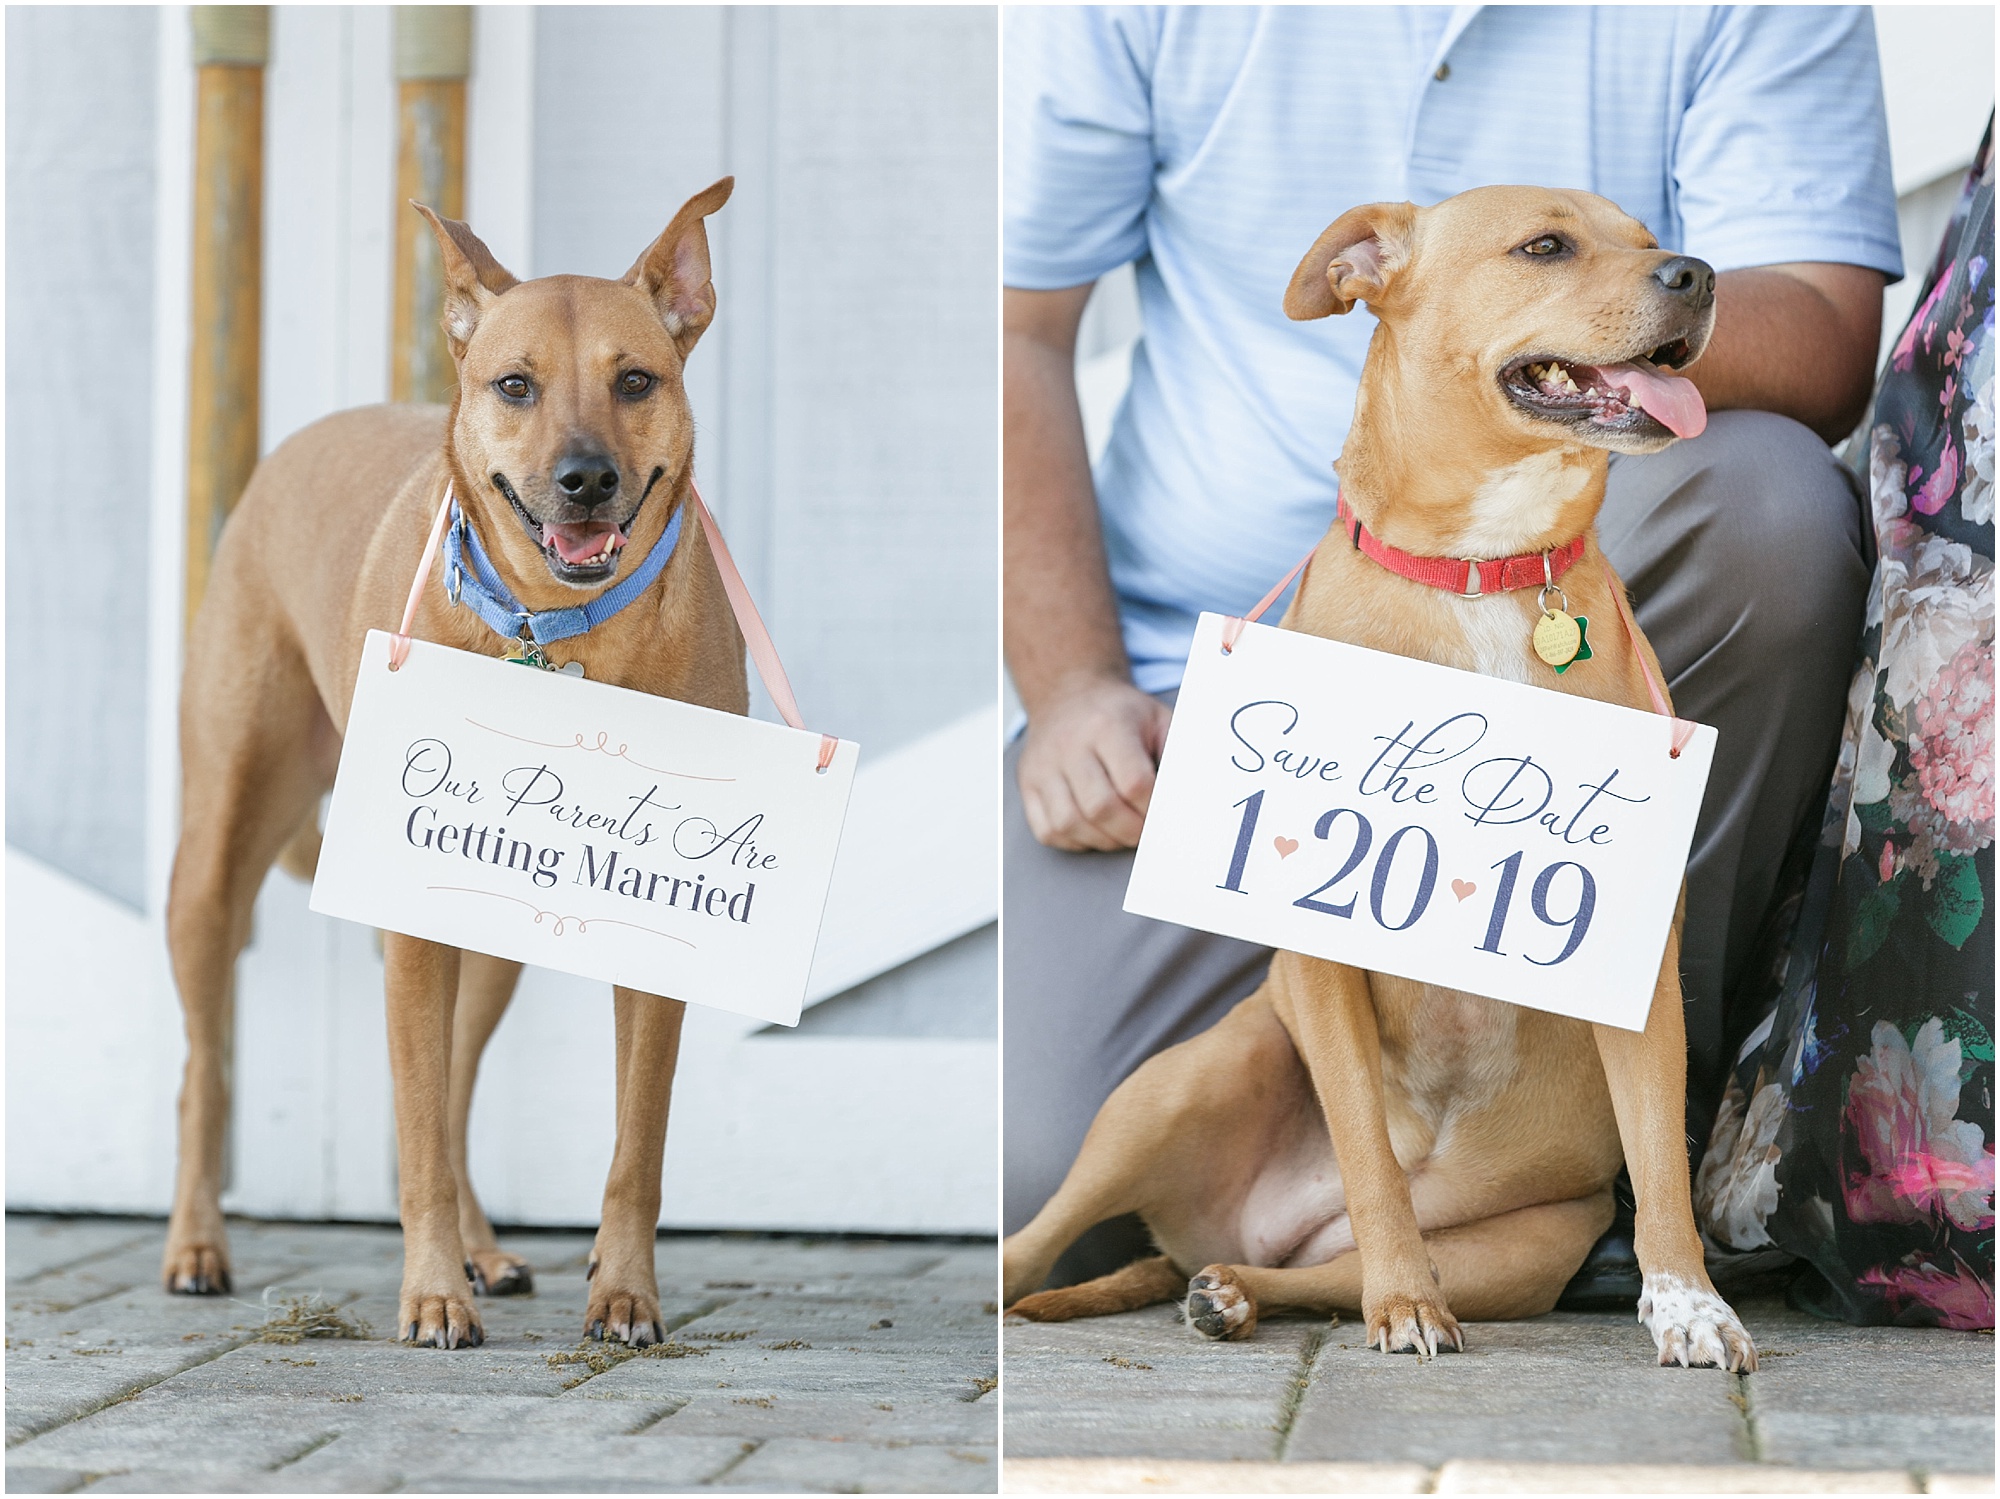 Dogs with save the date signs around their necks. 